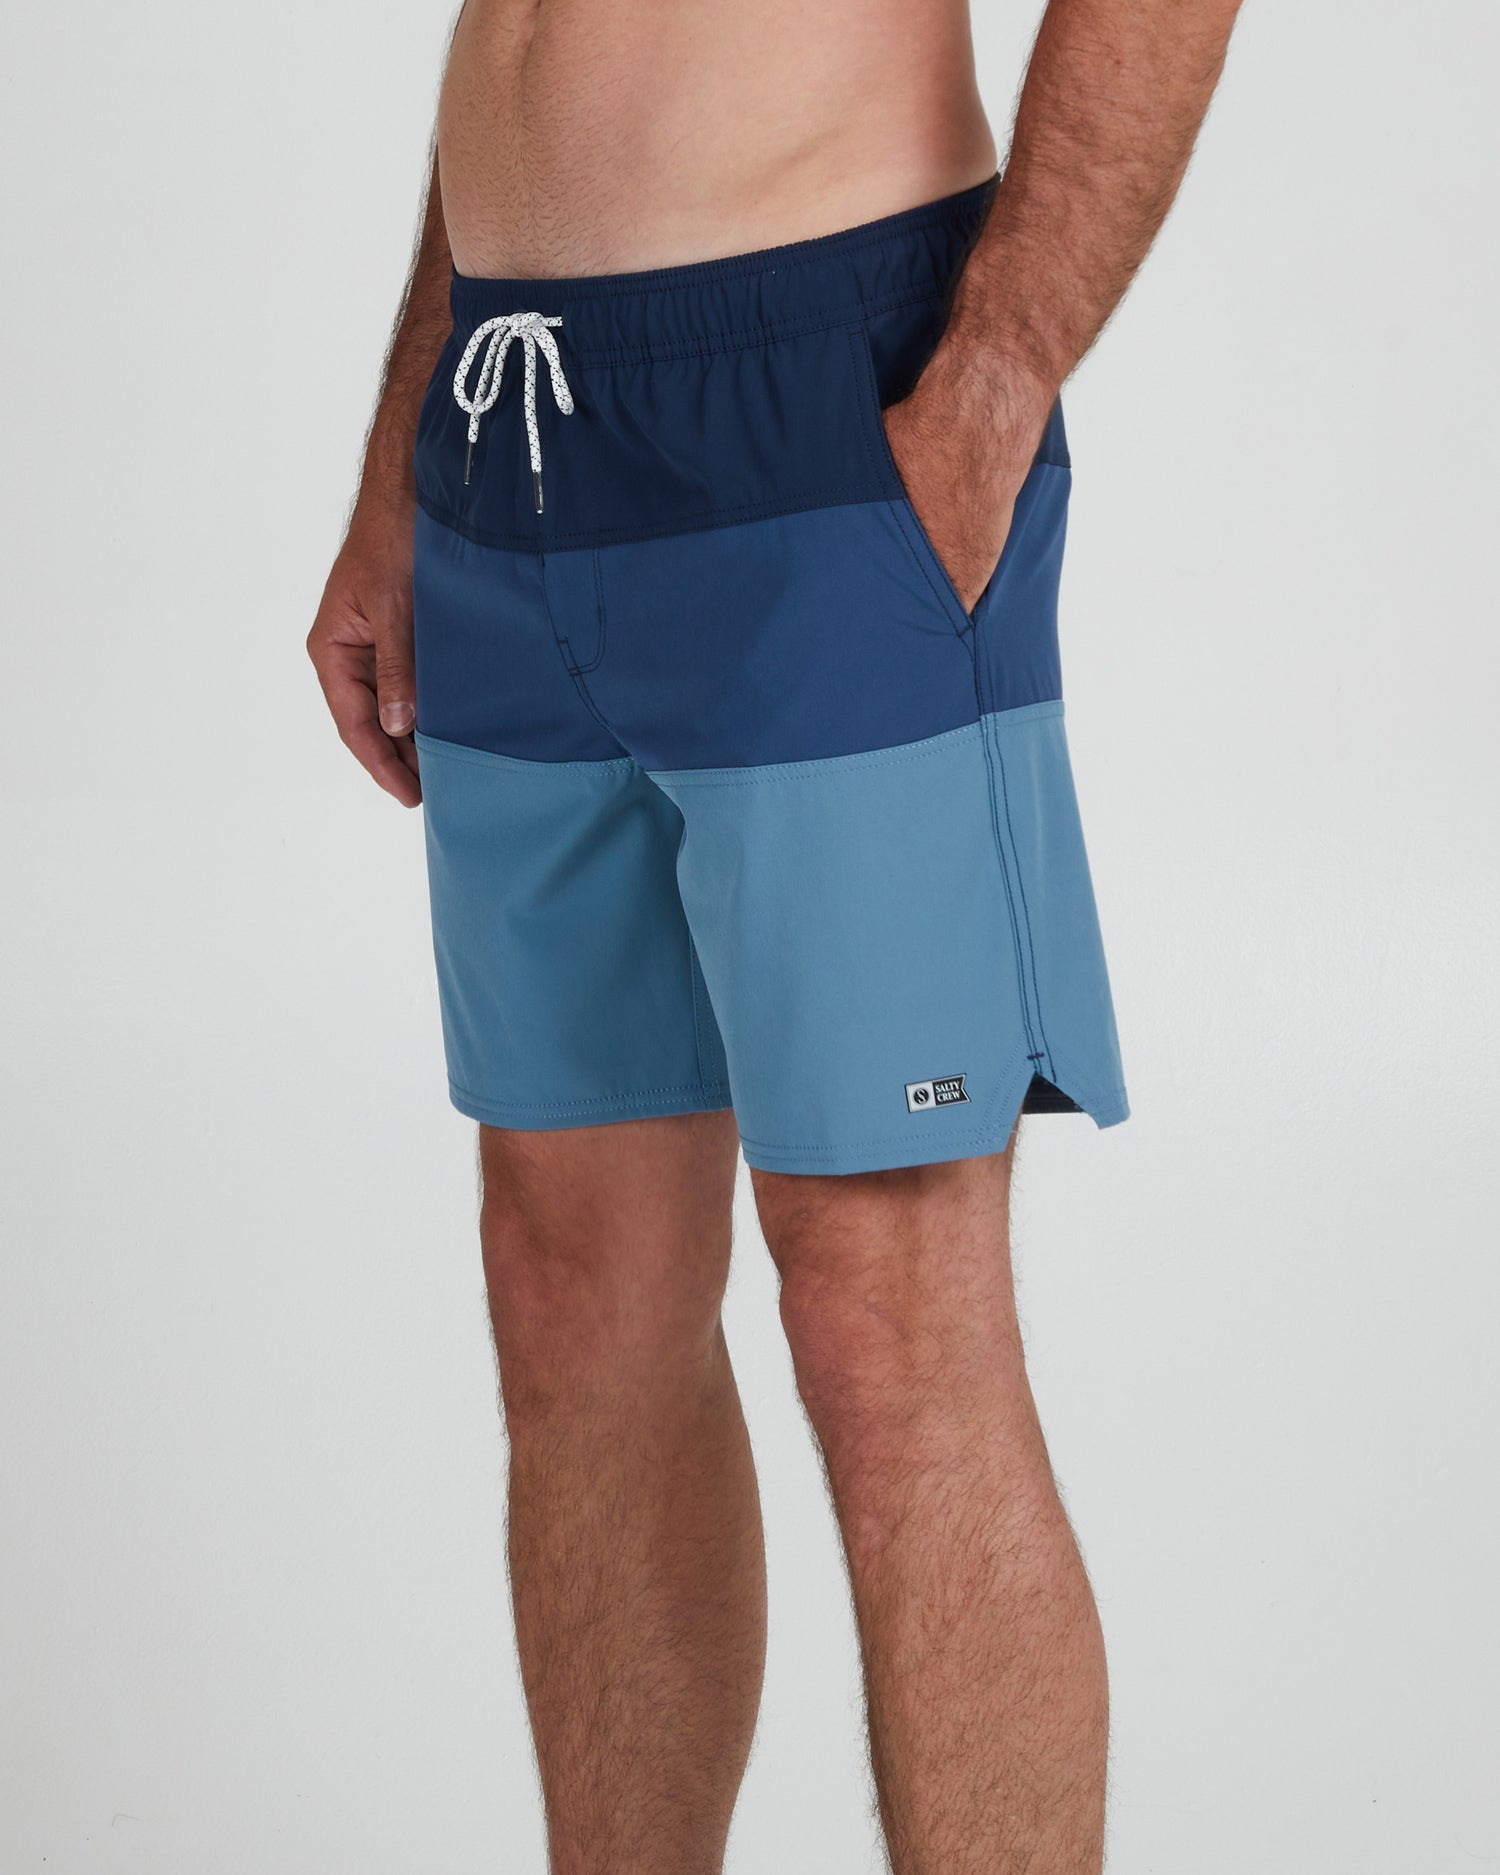 On body front angle of the Beacons 2 Sand Elastic Boardshort